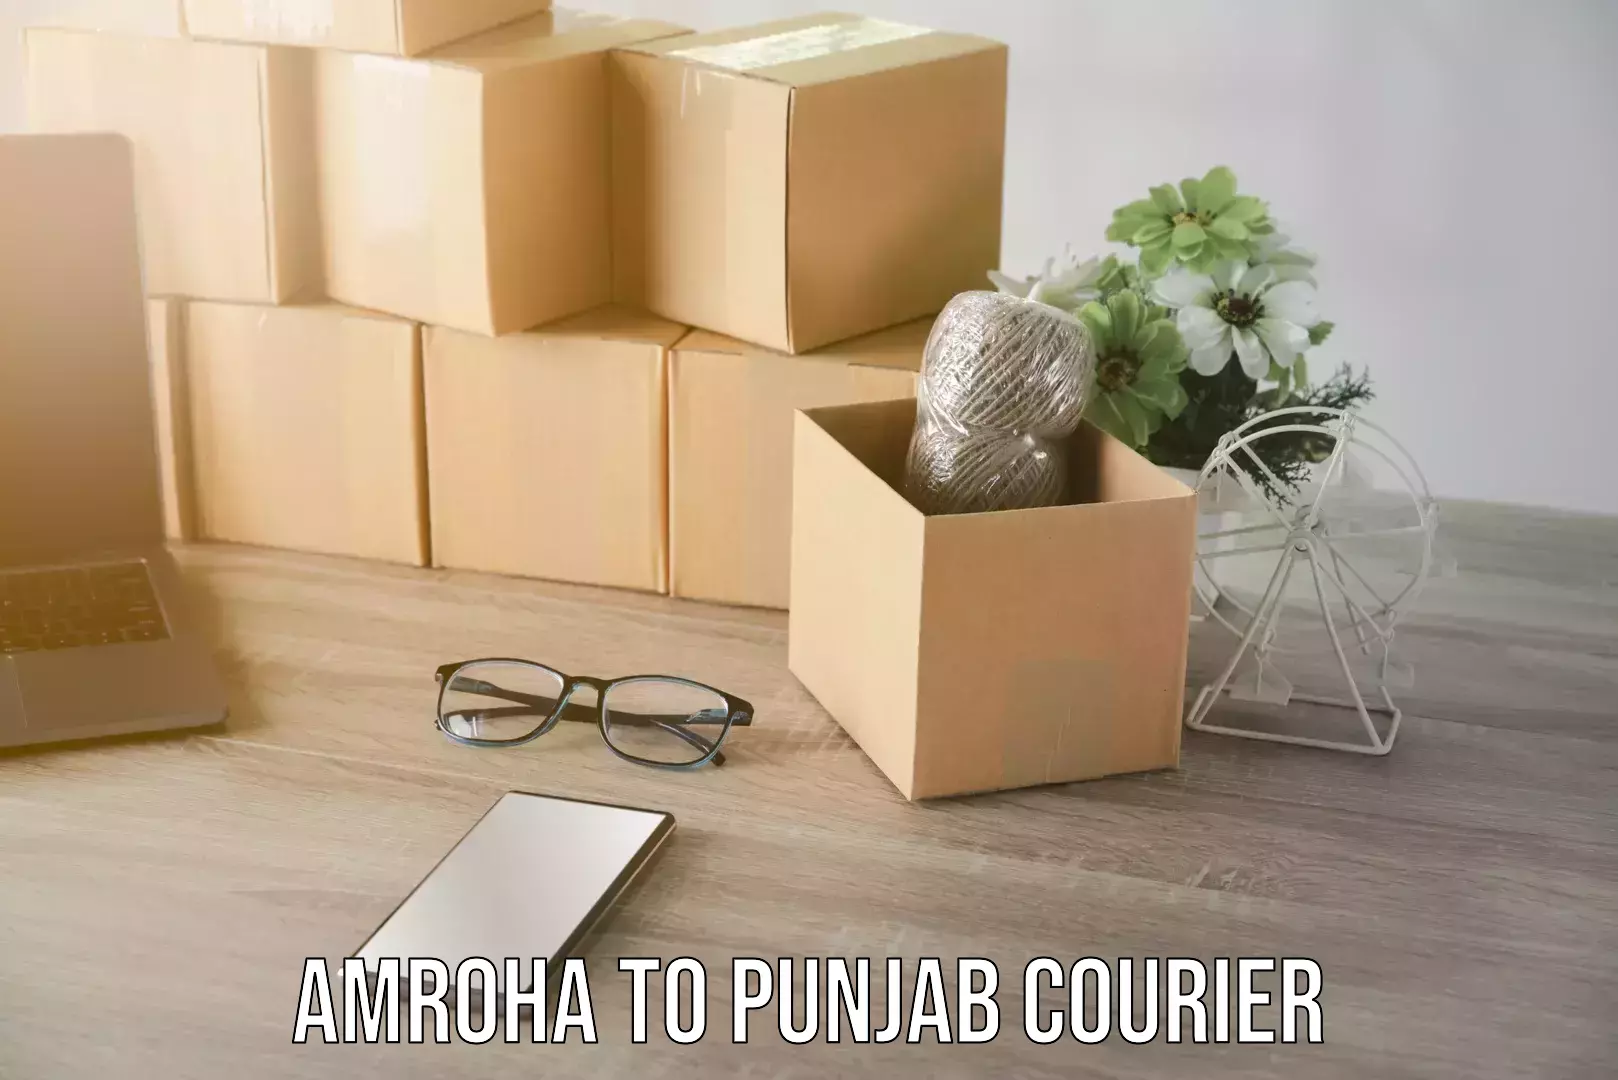 24-hour courier service Amroha to Punjab